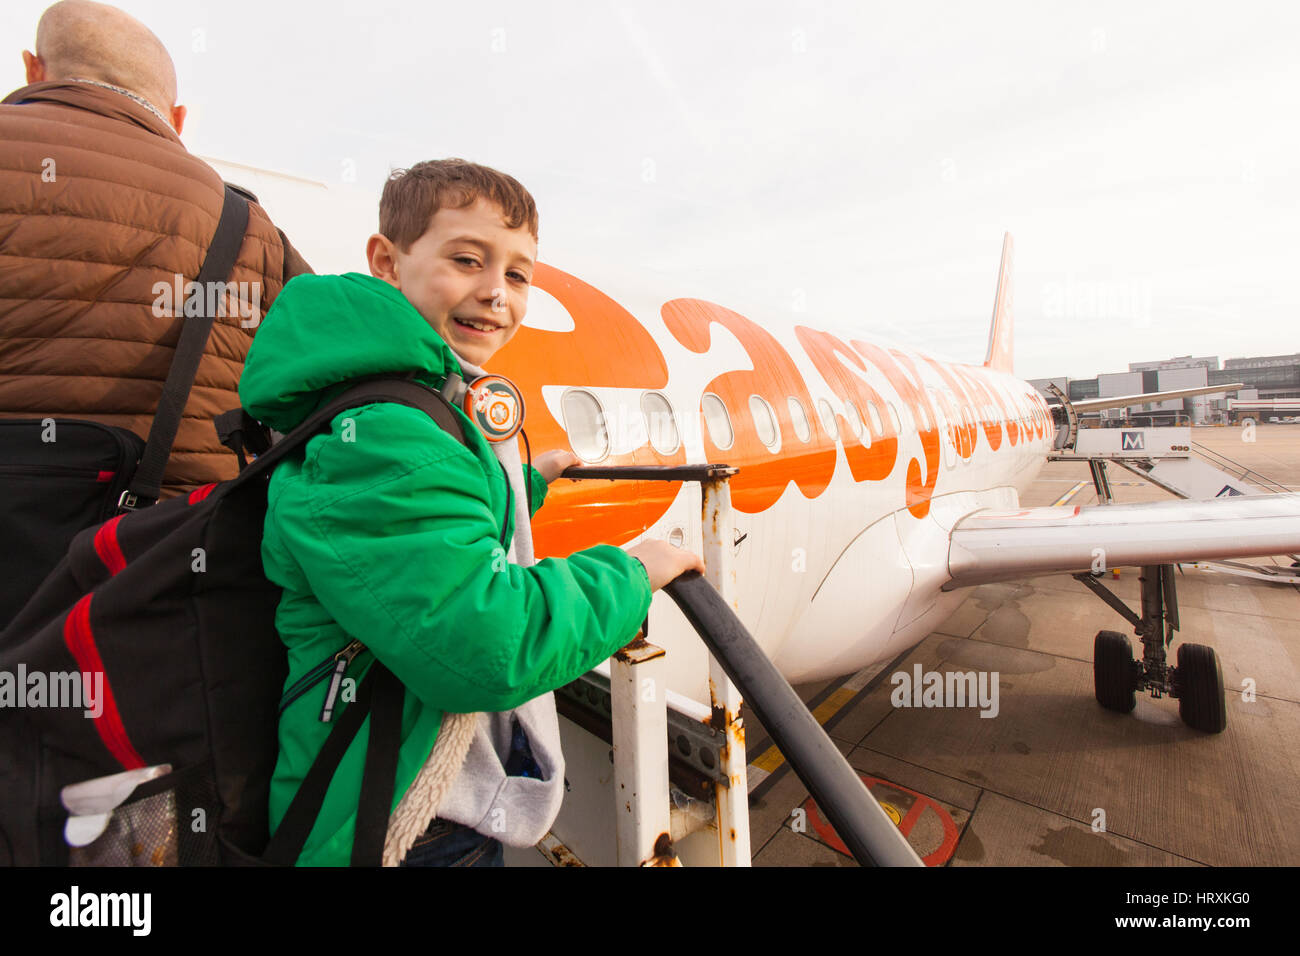 Seven year old boy excitedly boarding a Easyjet flight at London Gatwick airport. Stock Photo